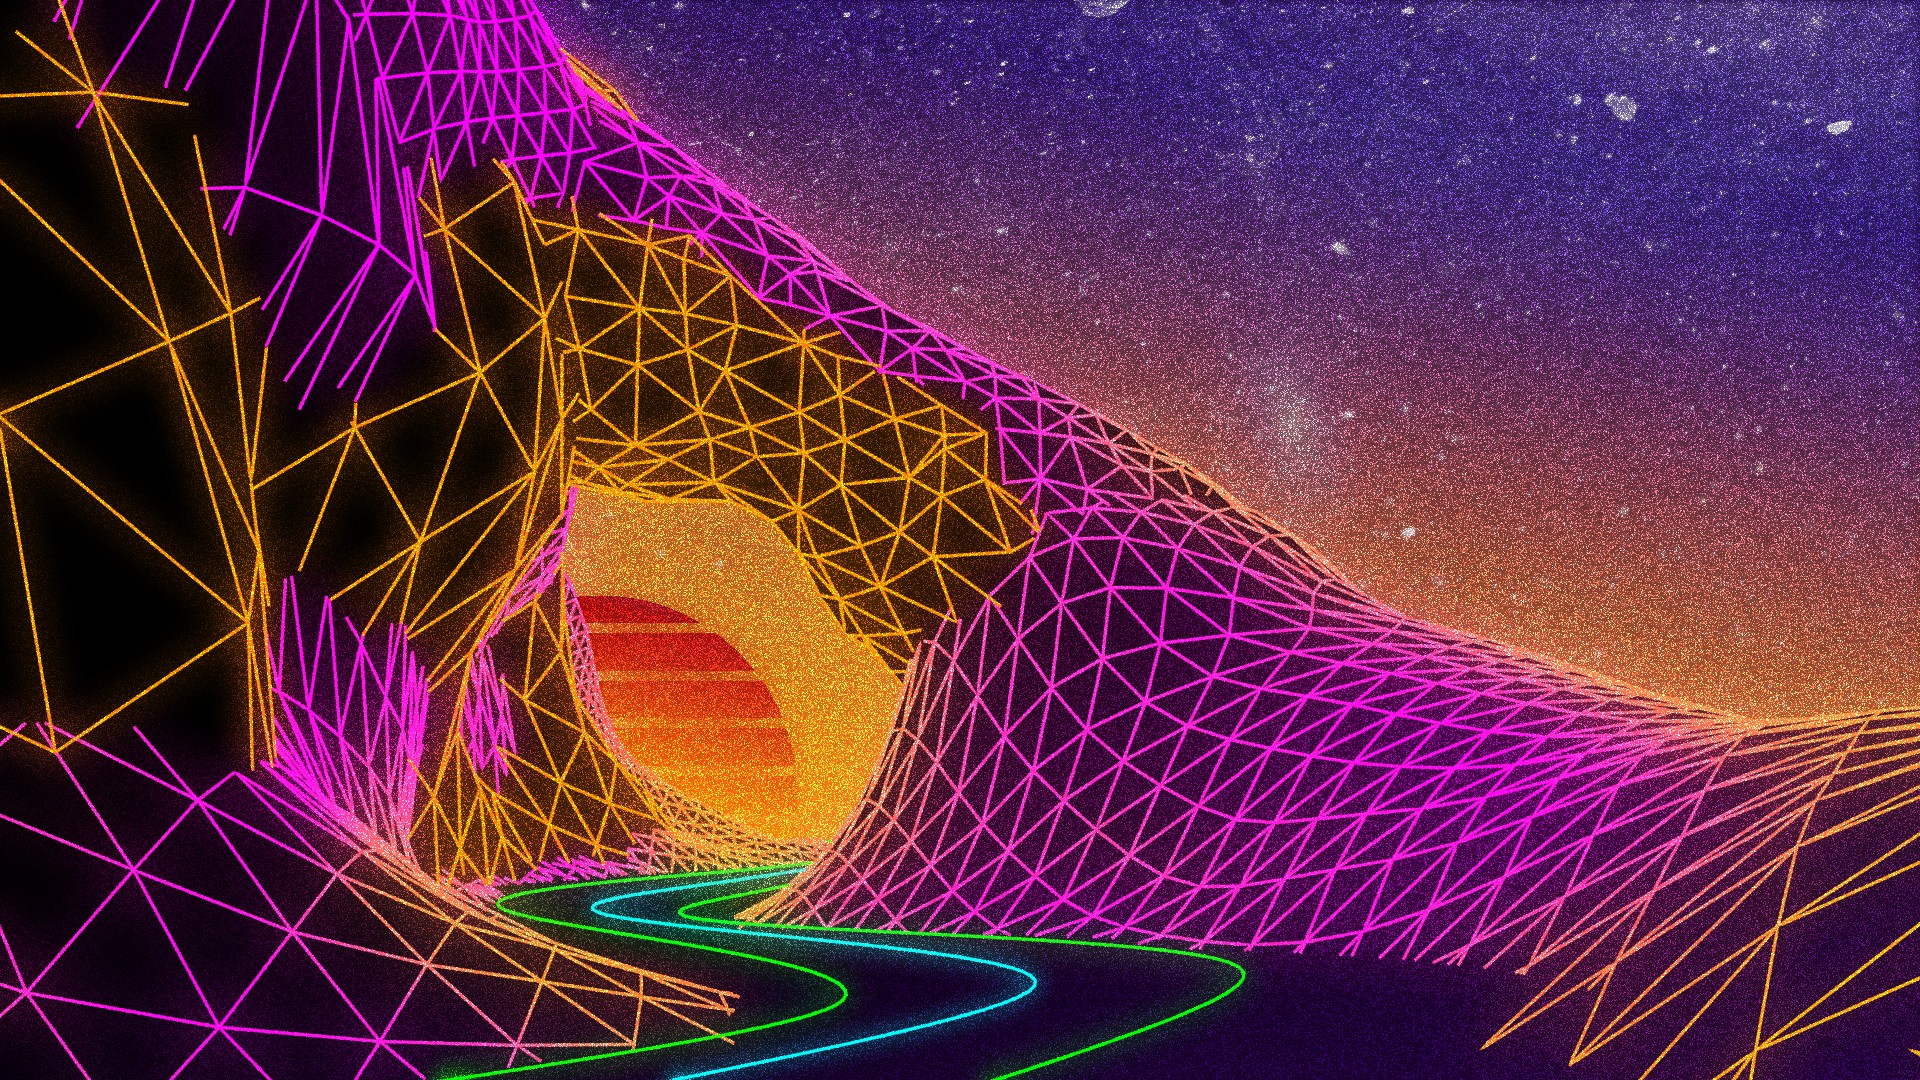 New Retro Wave, Sun, Wireframe, Road Wallpaper HD / Desktop and Mobile Background